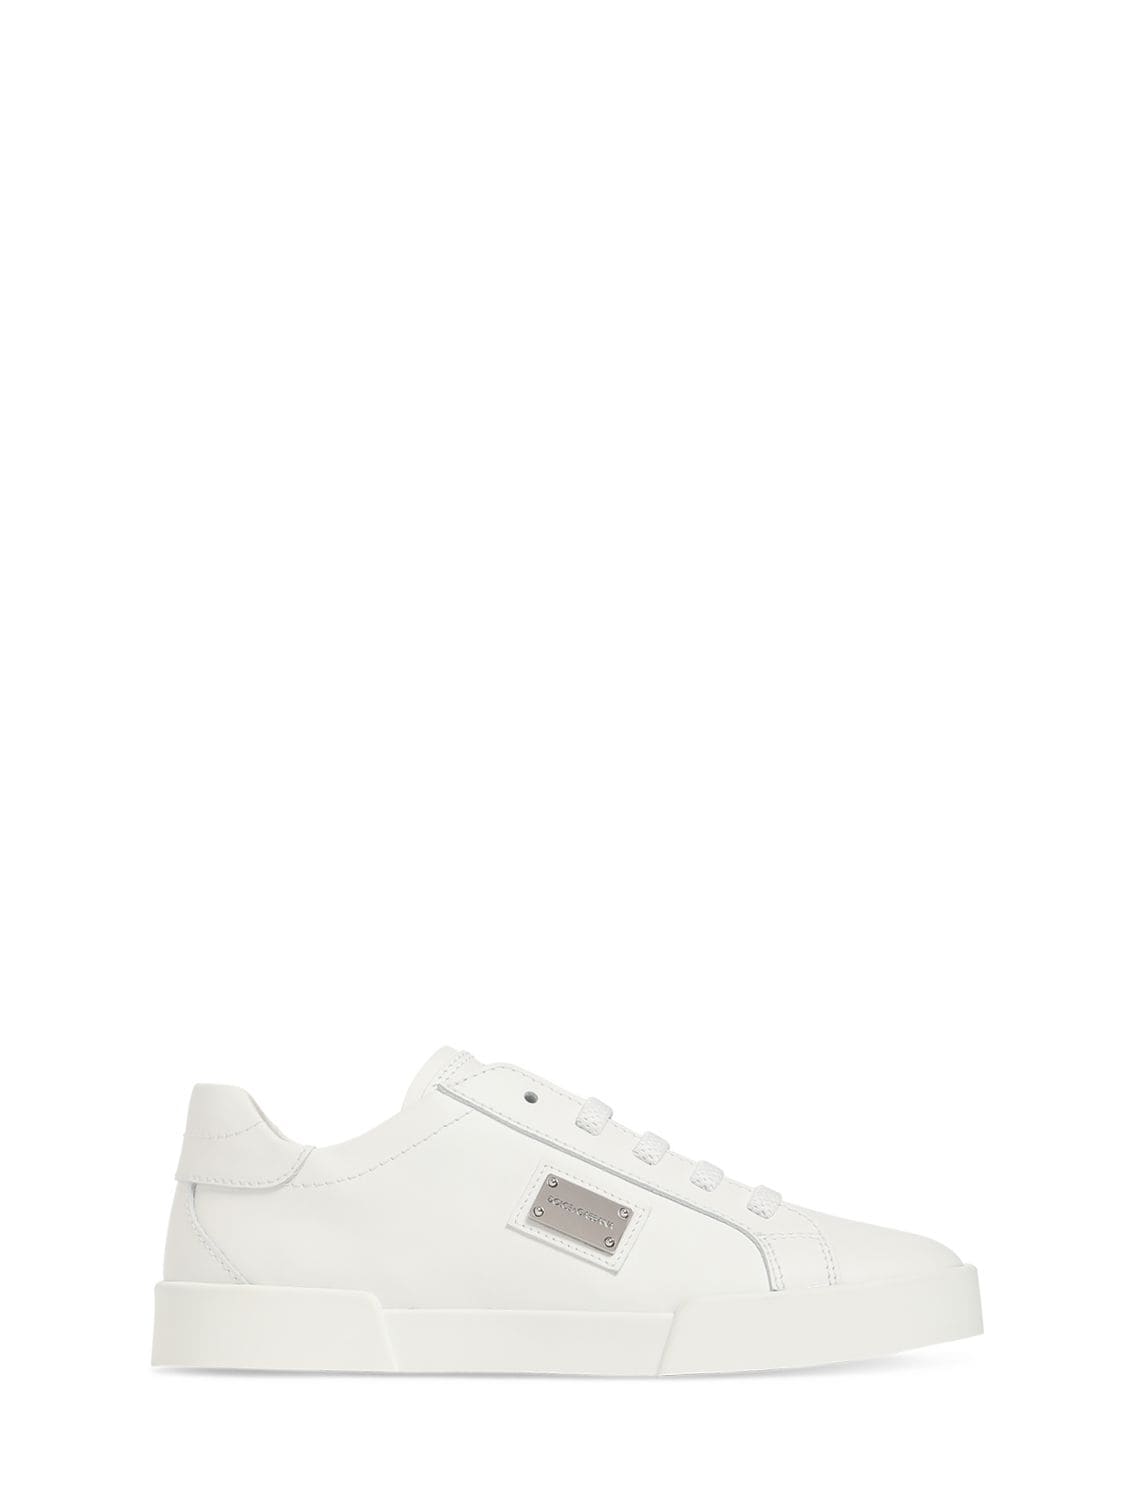 Dolce & Gabbana Kids' Metal Logo Leather Lace-up Sneakers In White